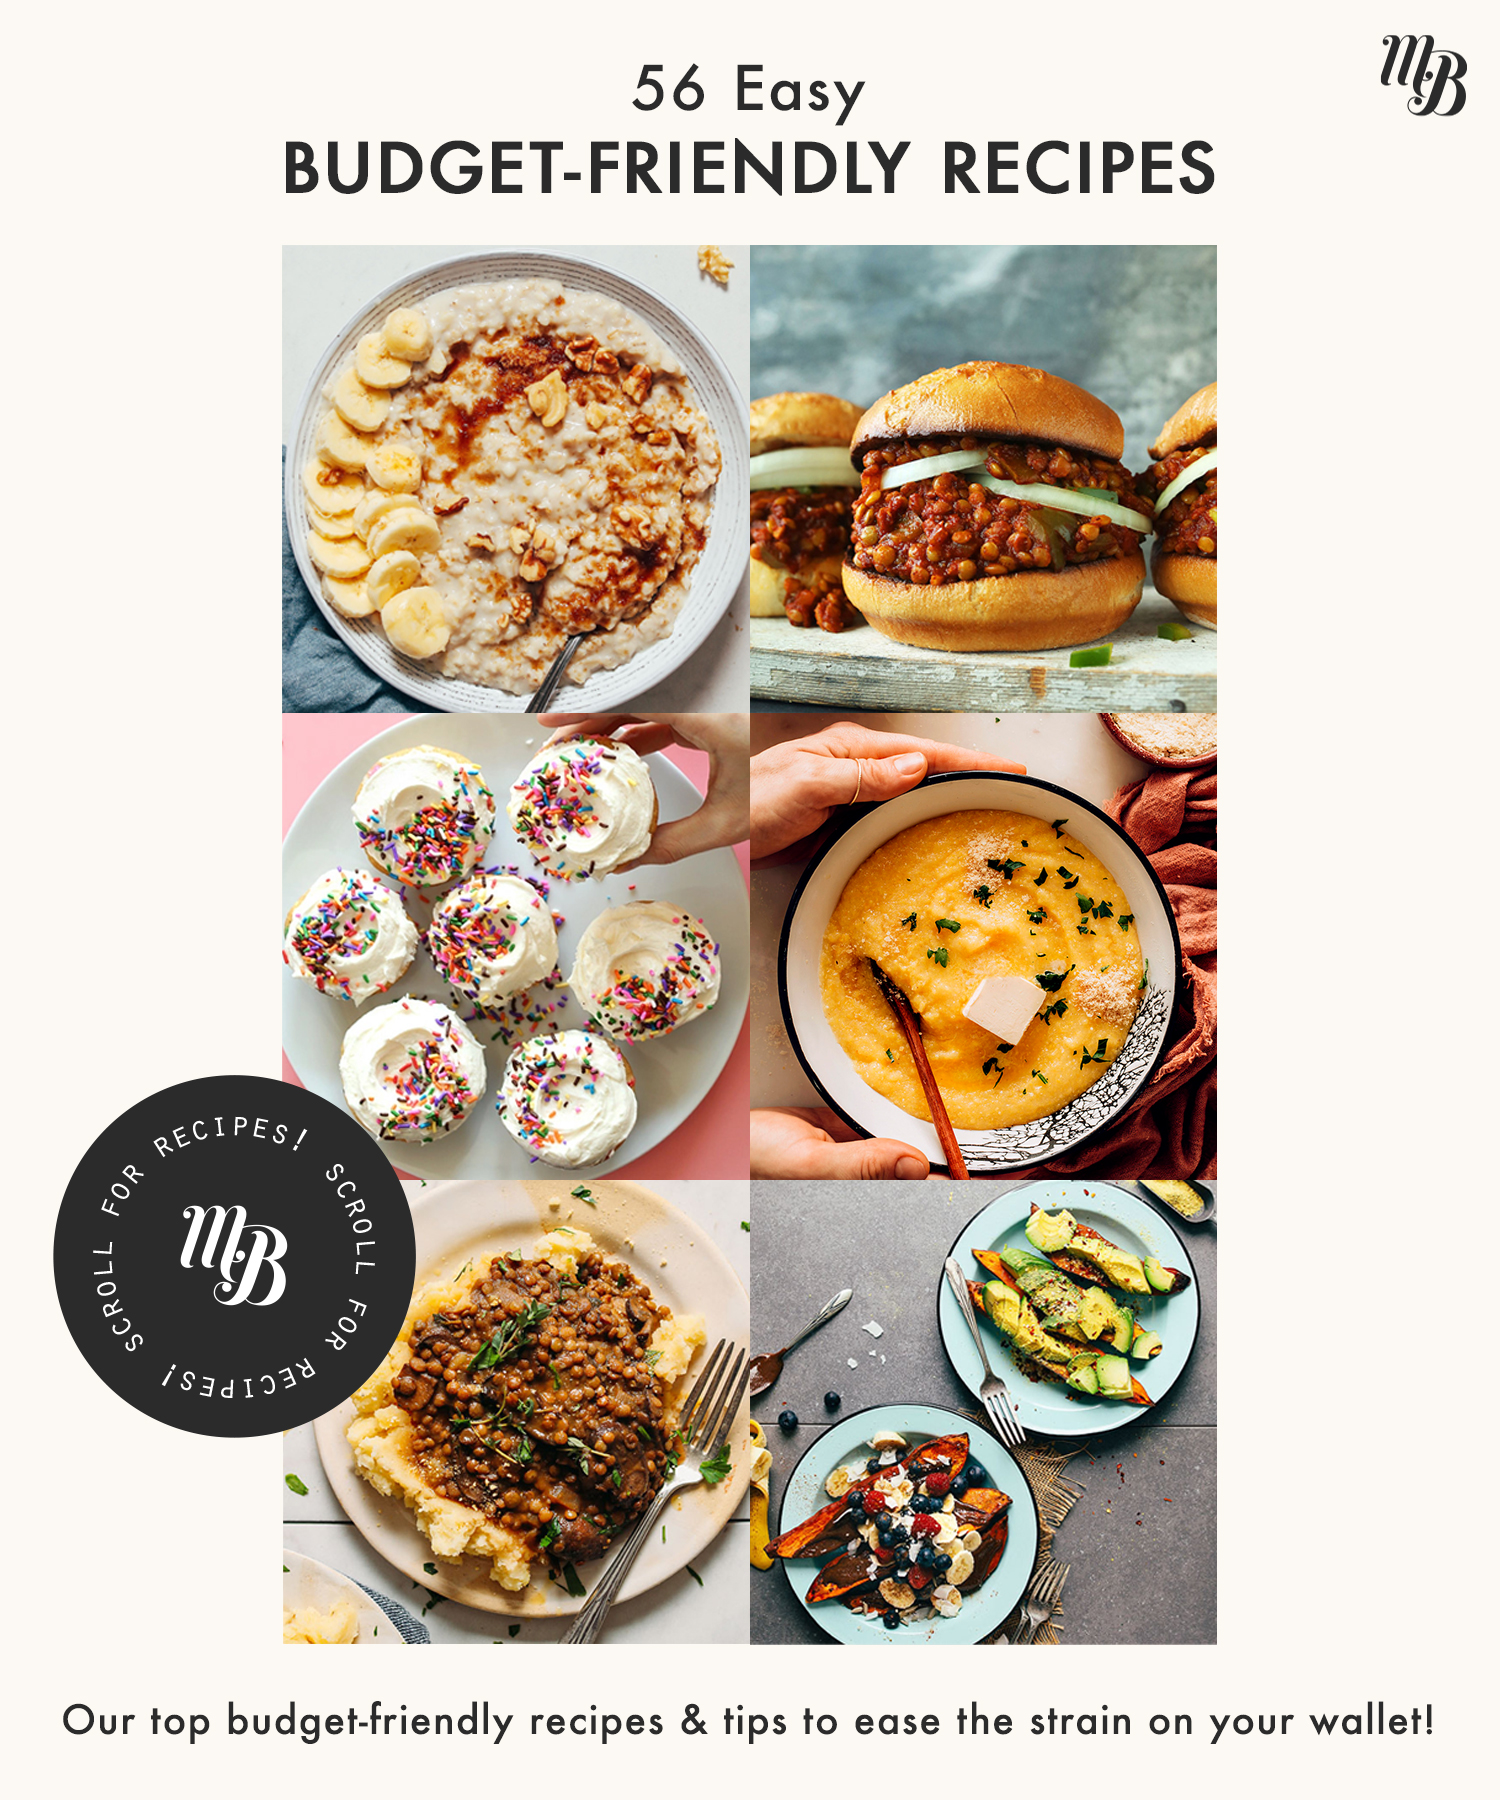 Assortment of budget-friendly recipes including oatmeal, sloppy joes, polenta, and more